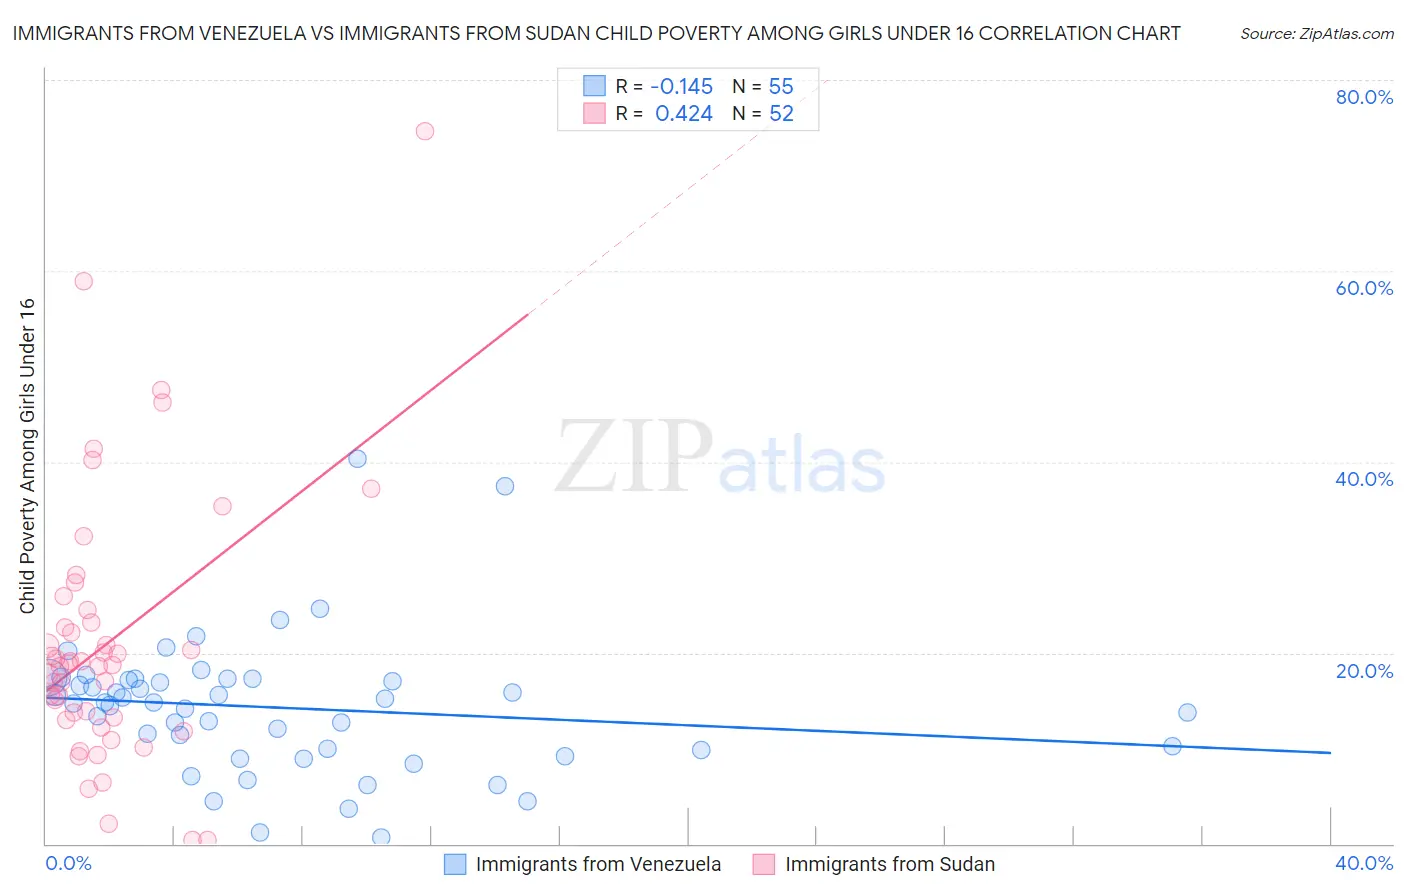 Immigrants from Venezuela vs Immigrants from Sudan Child Poverty Among Girls Under 16